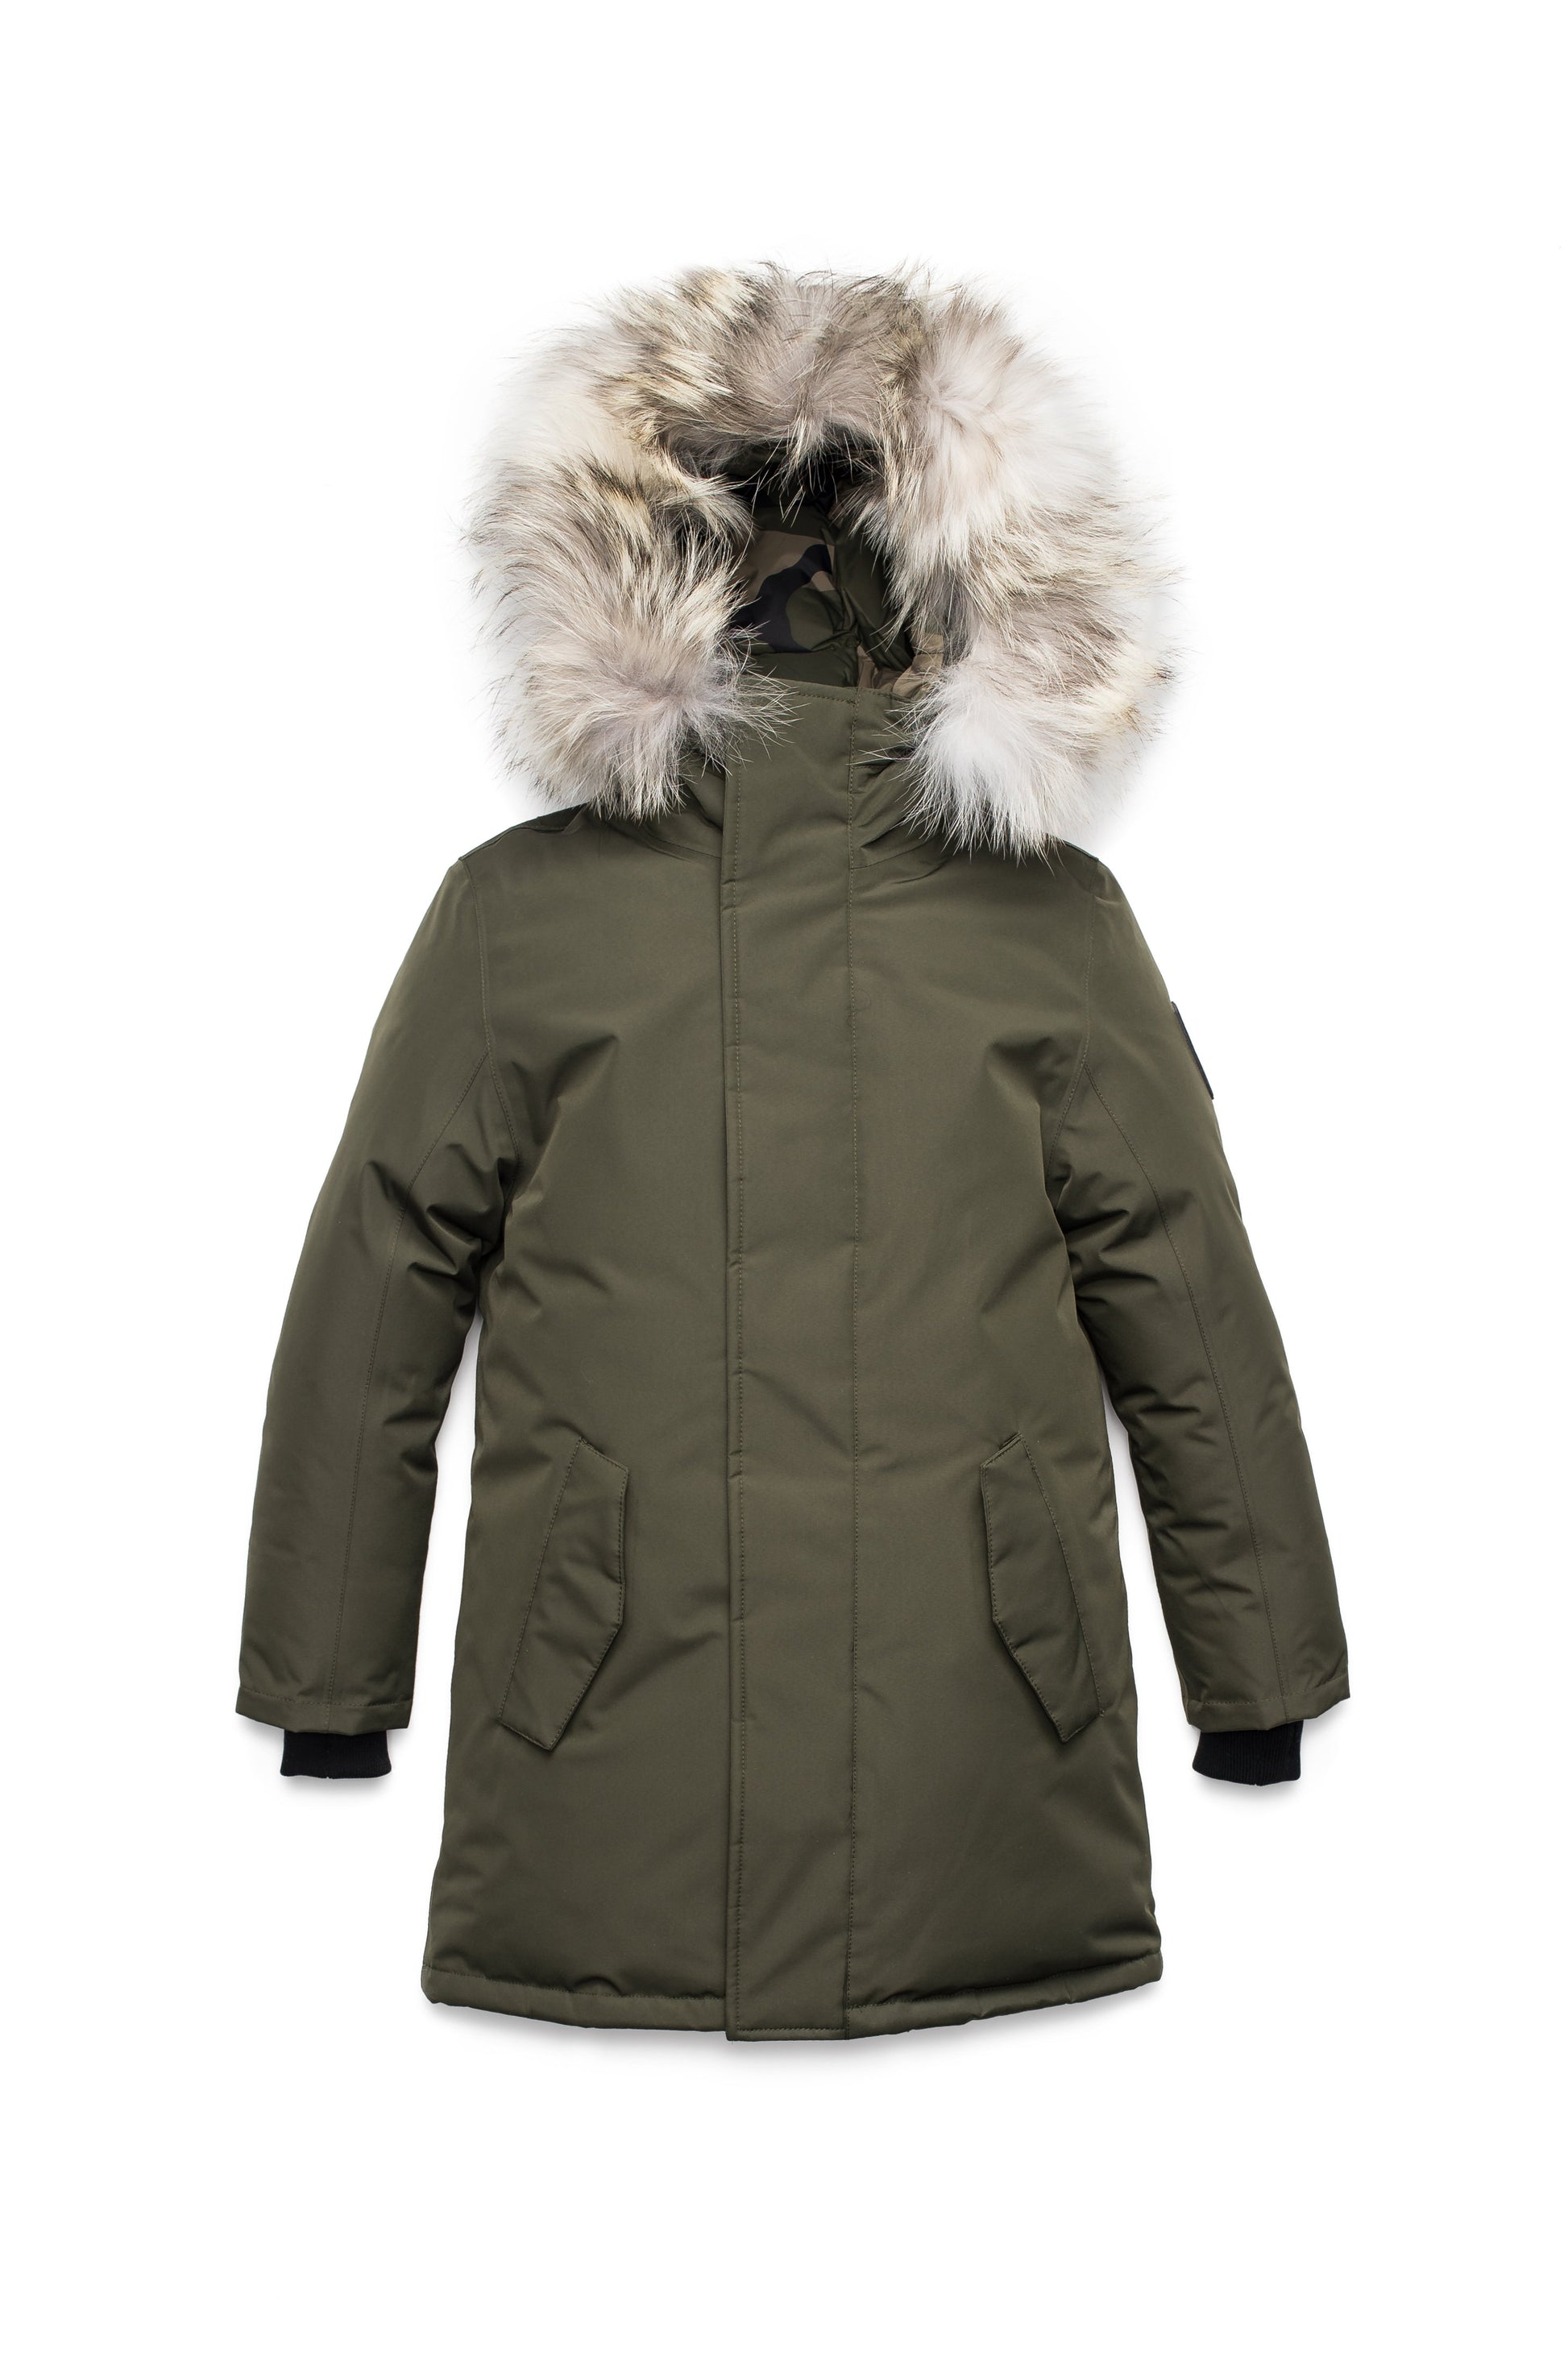 Kids' thigh length down-filled parka with non-removable hood and removable coyote fur trim in Fatigue